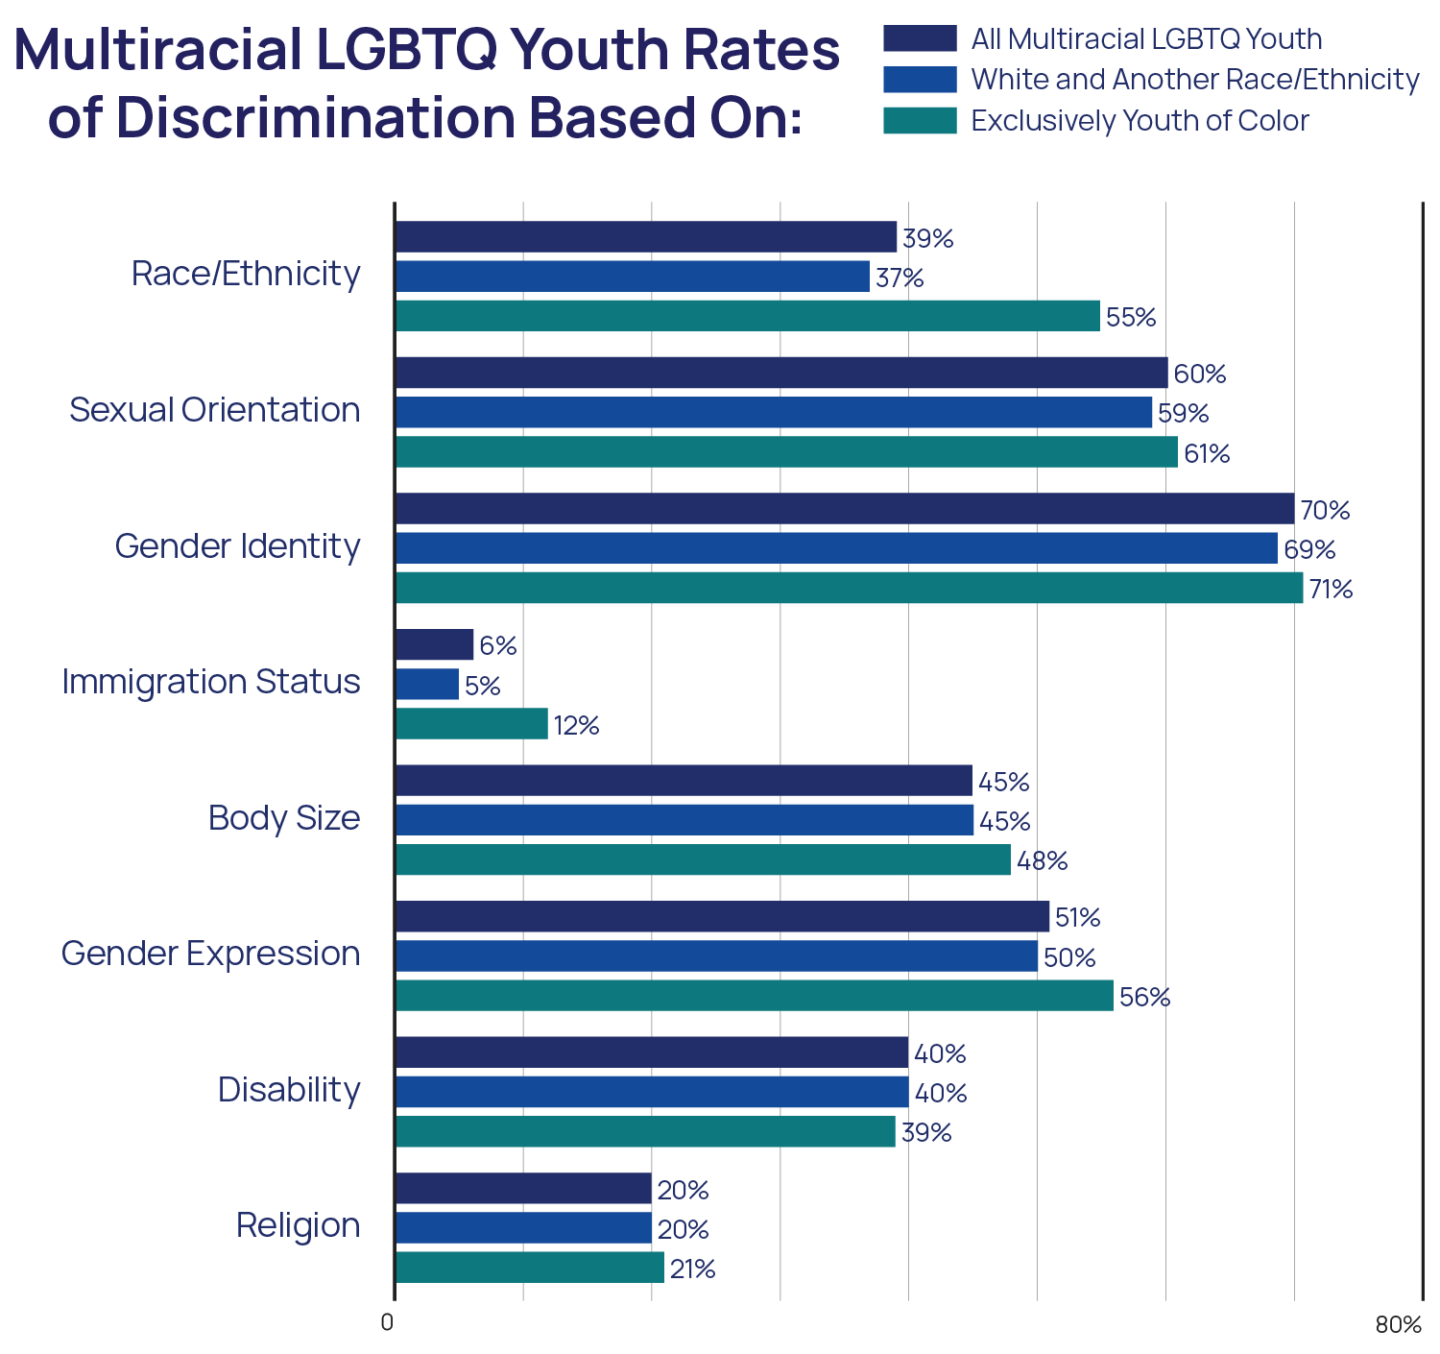 Multiracial LGBTQ Youth Rates of Discrimination Based On: chart